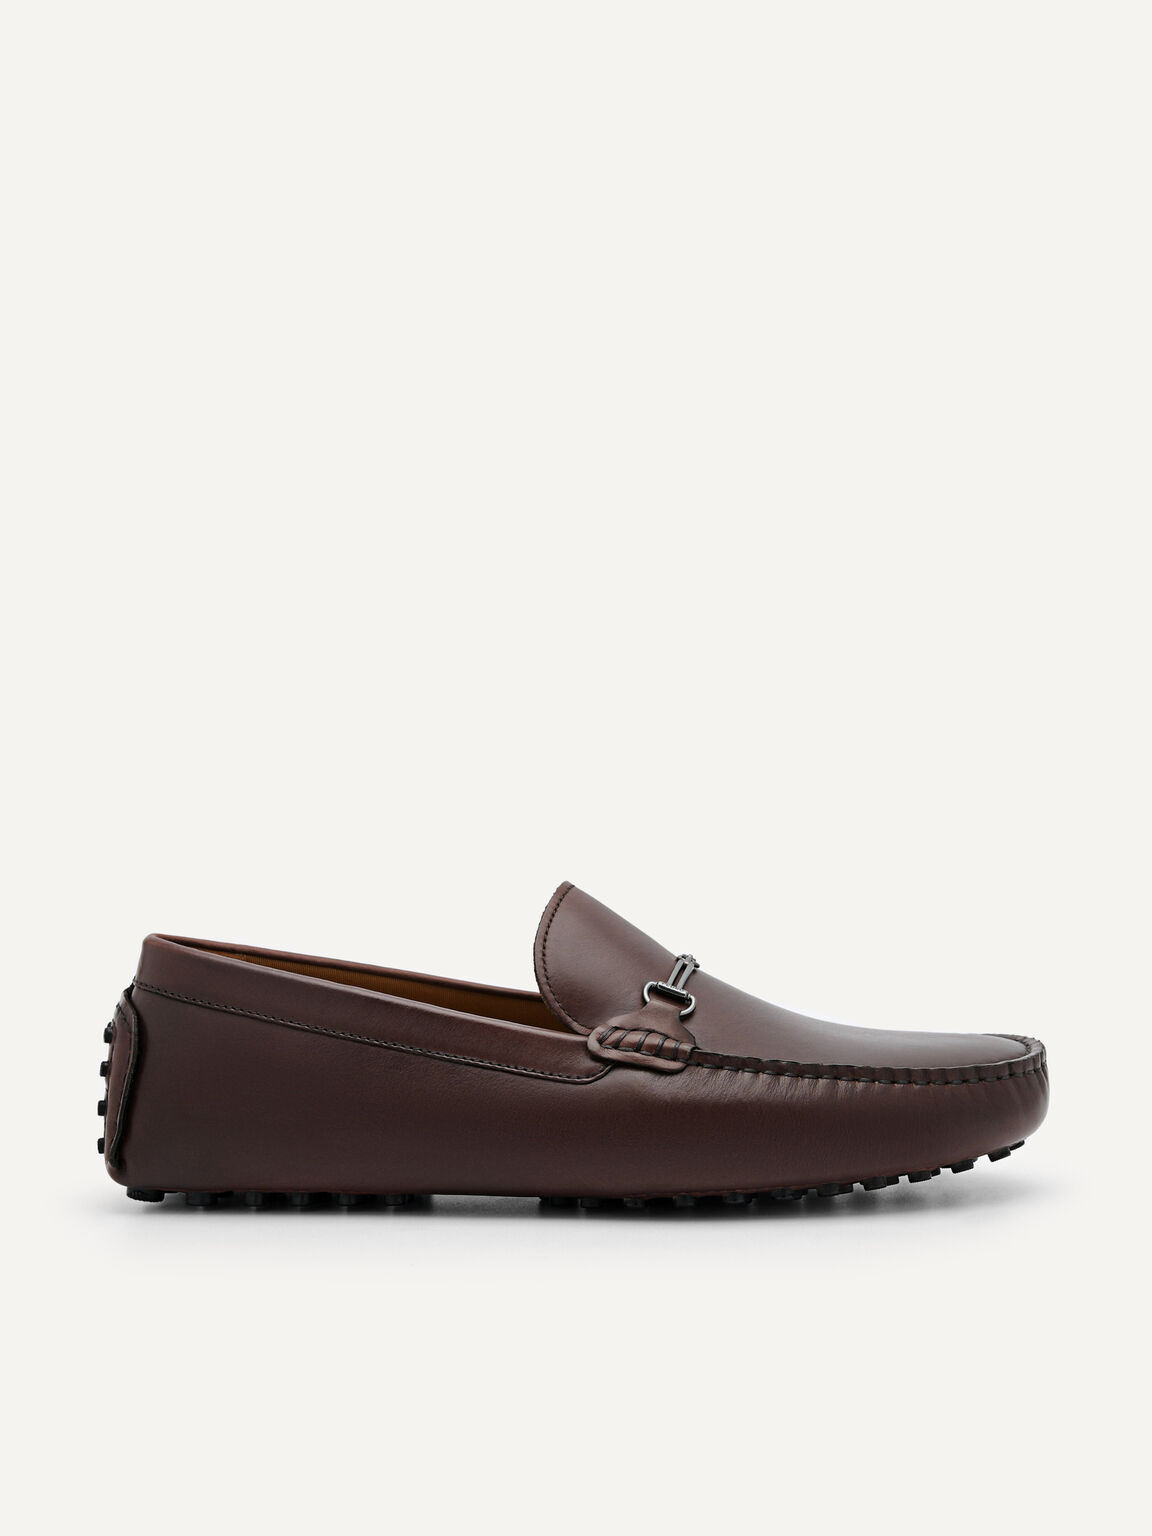 Anthony Leather Driving Shoes, Dark Brown, hi-res